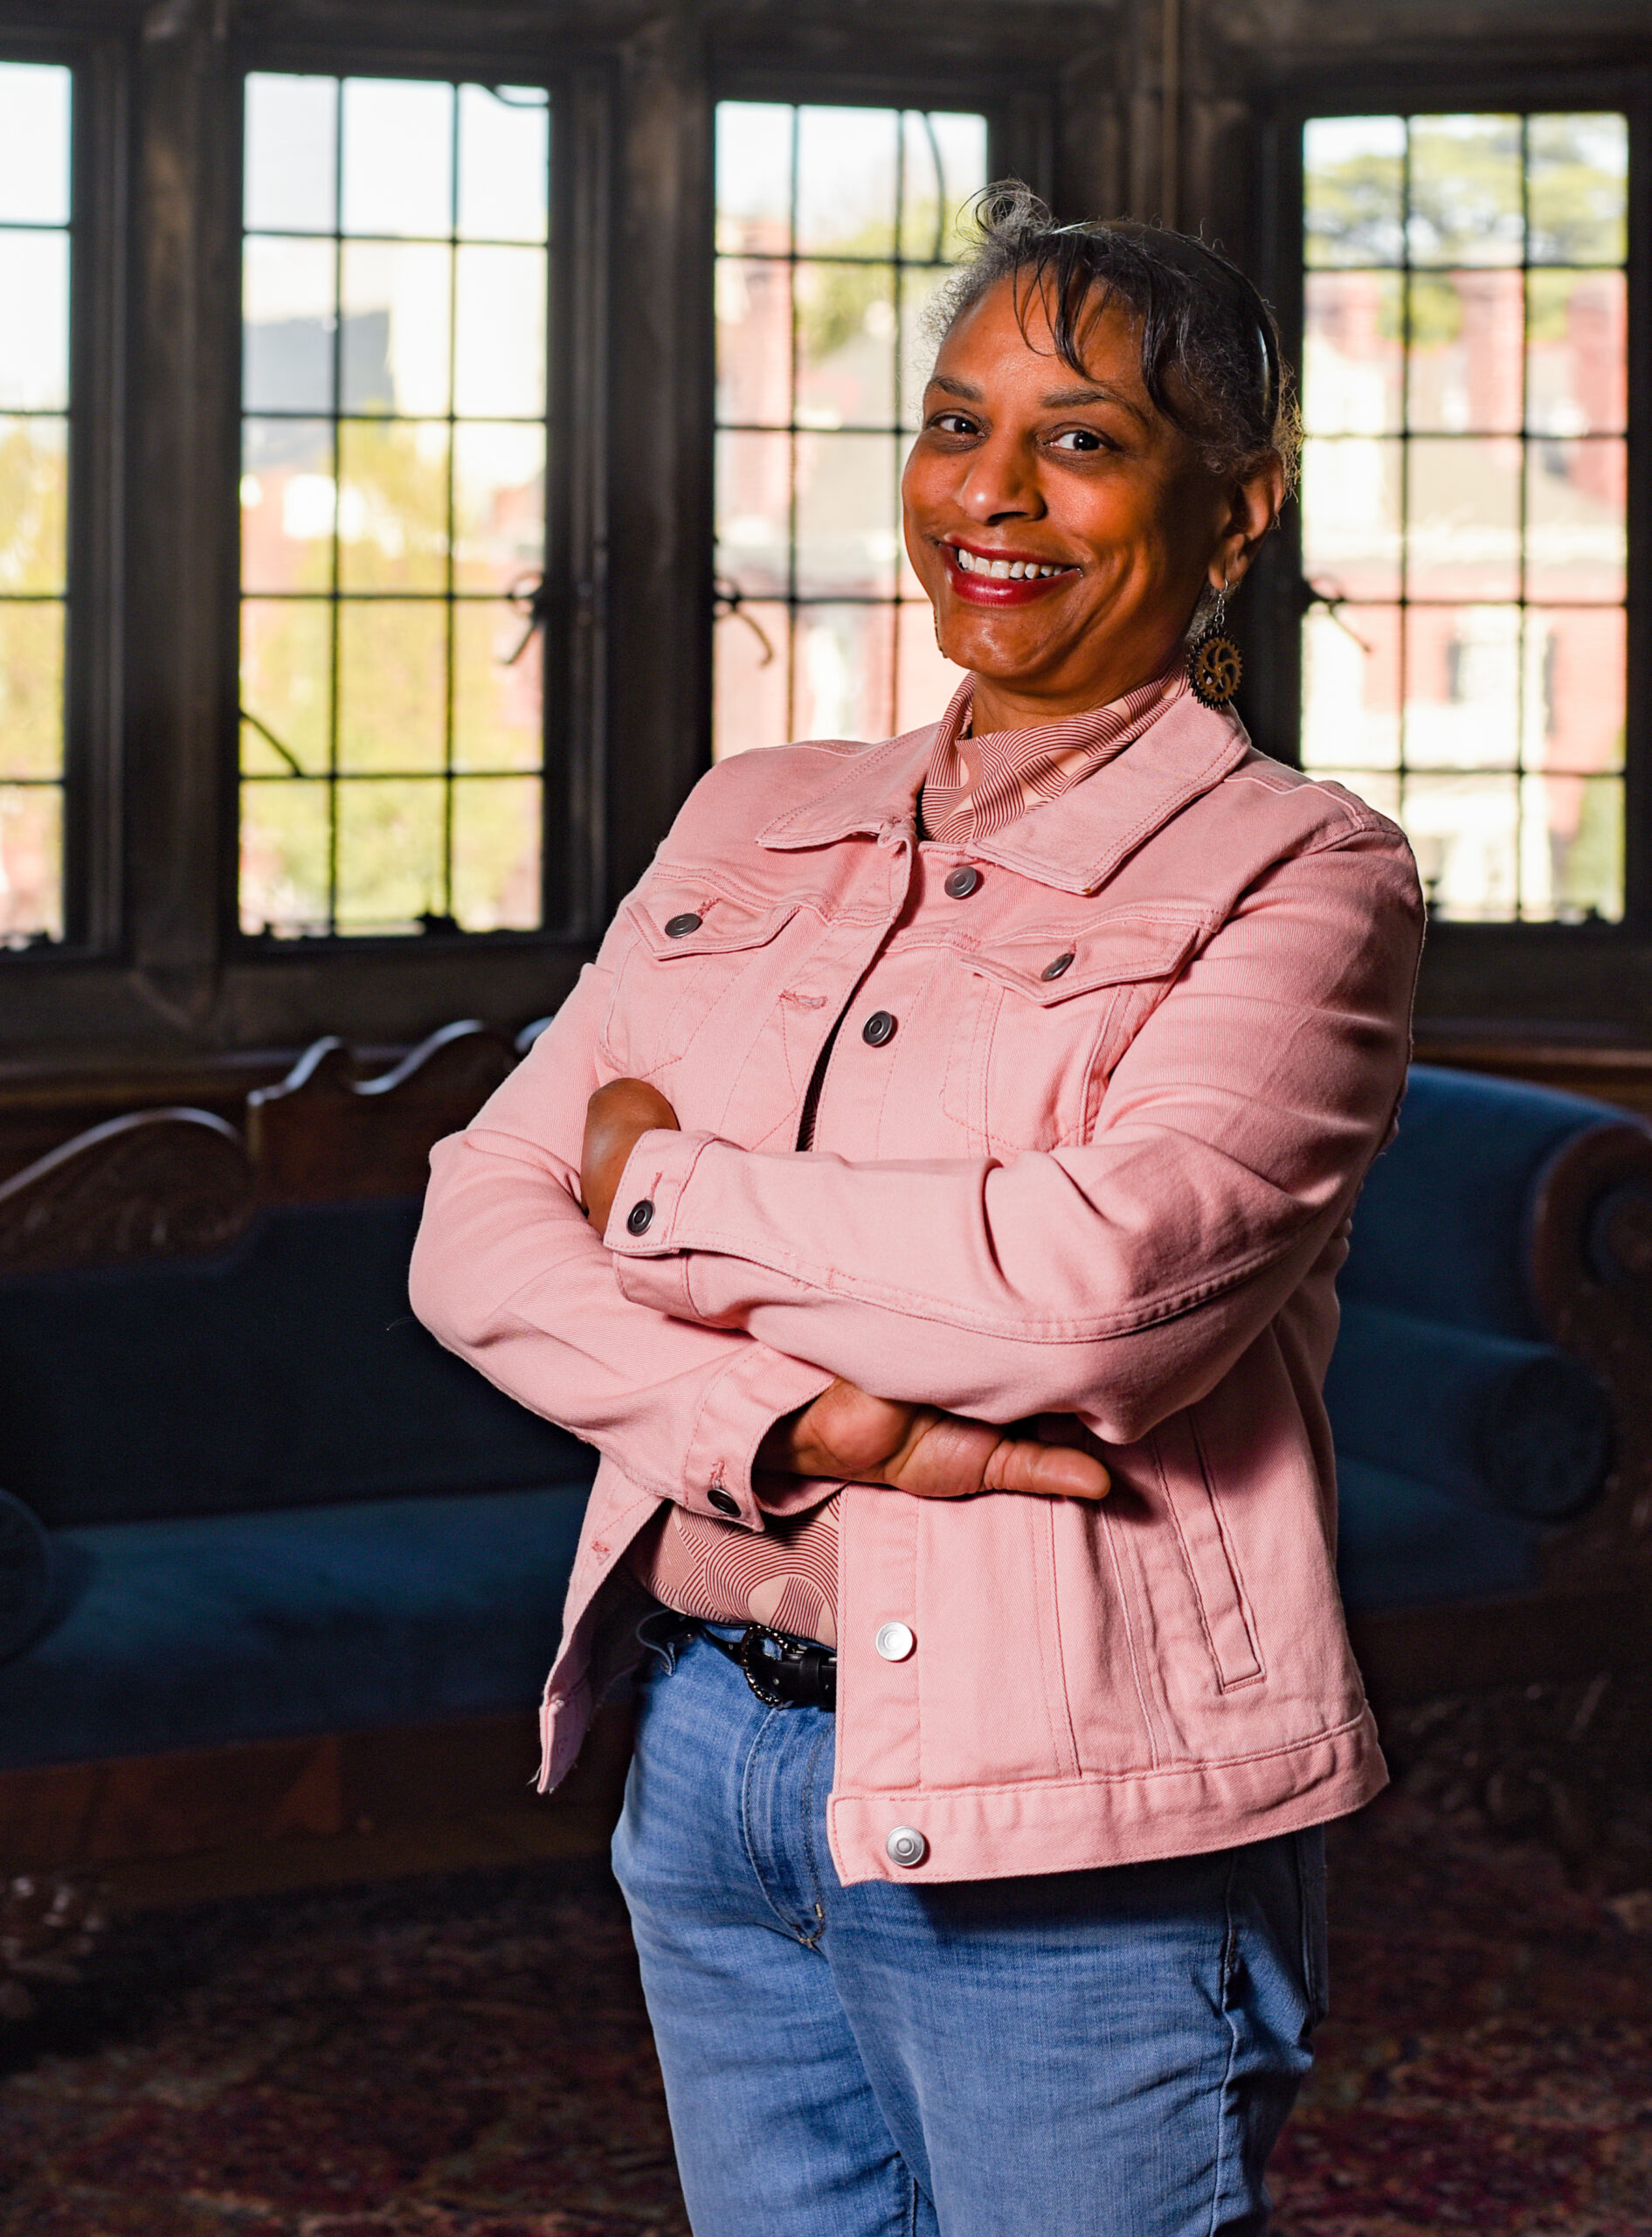 Image of Founder, Anita Crowder, wearing a pink denim jacket and jeans with her arms crossed and a welcoming smile on her face